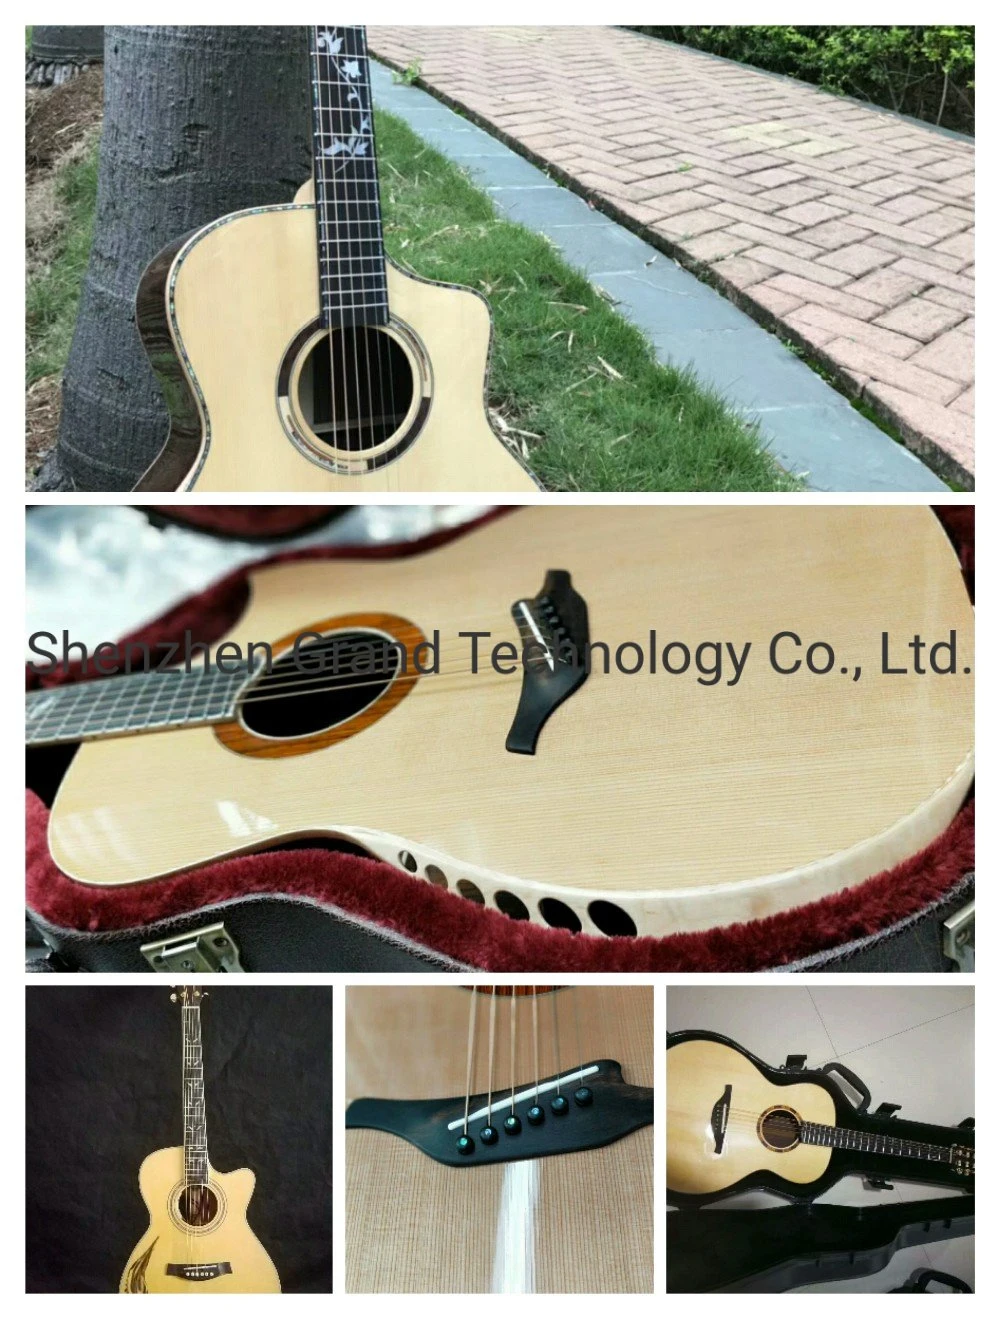 Custom D45h 12 Strings 41'' Dreadnought Acoustic Guitar with Abalone Inlay Binding White Tuners